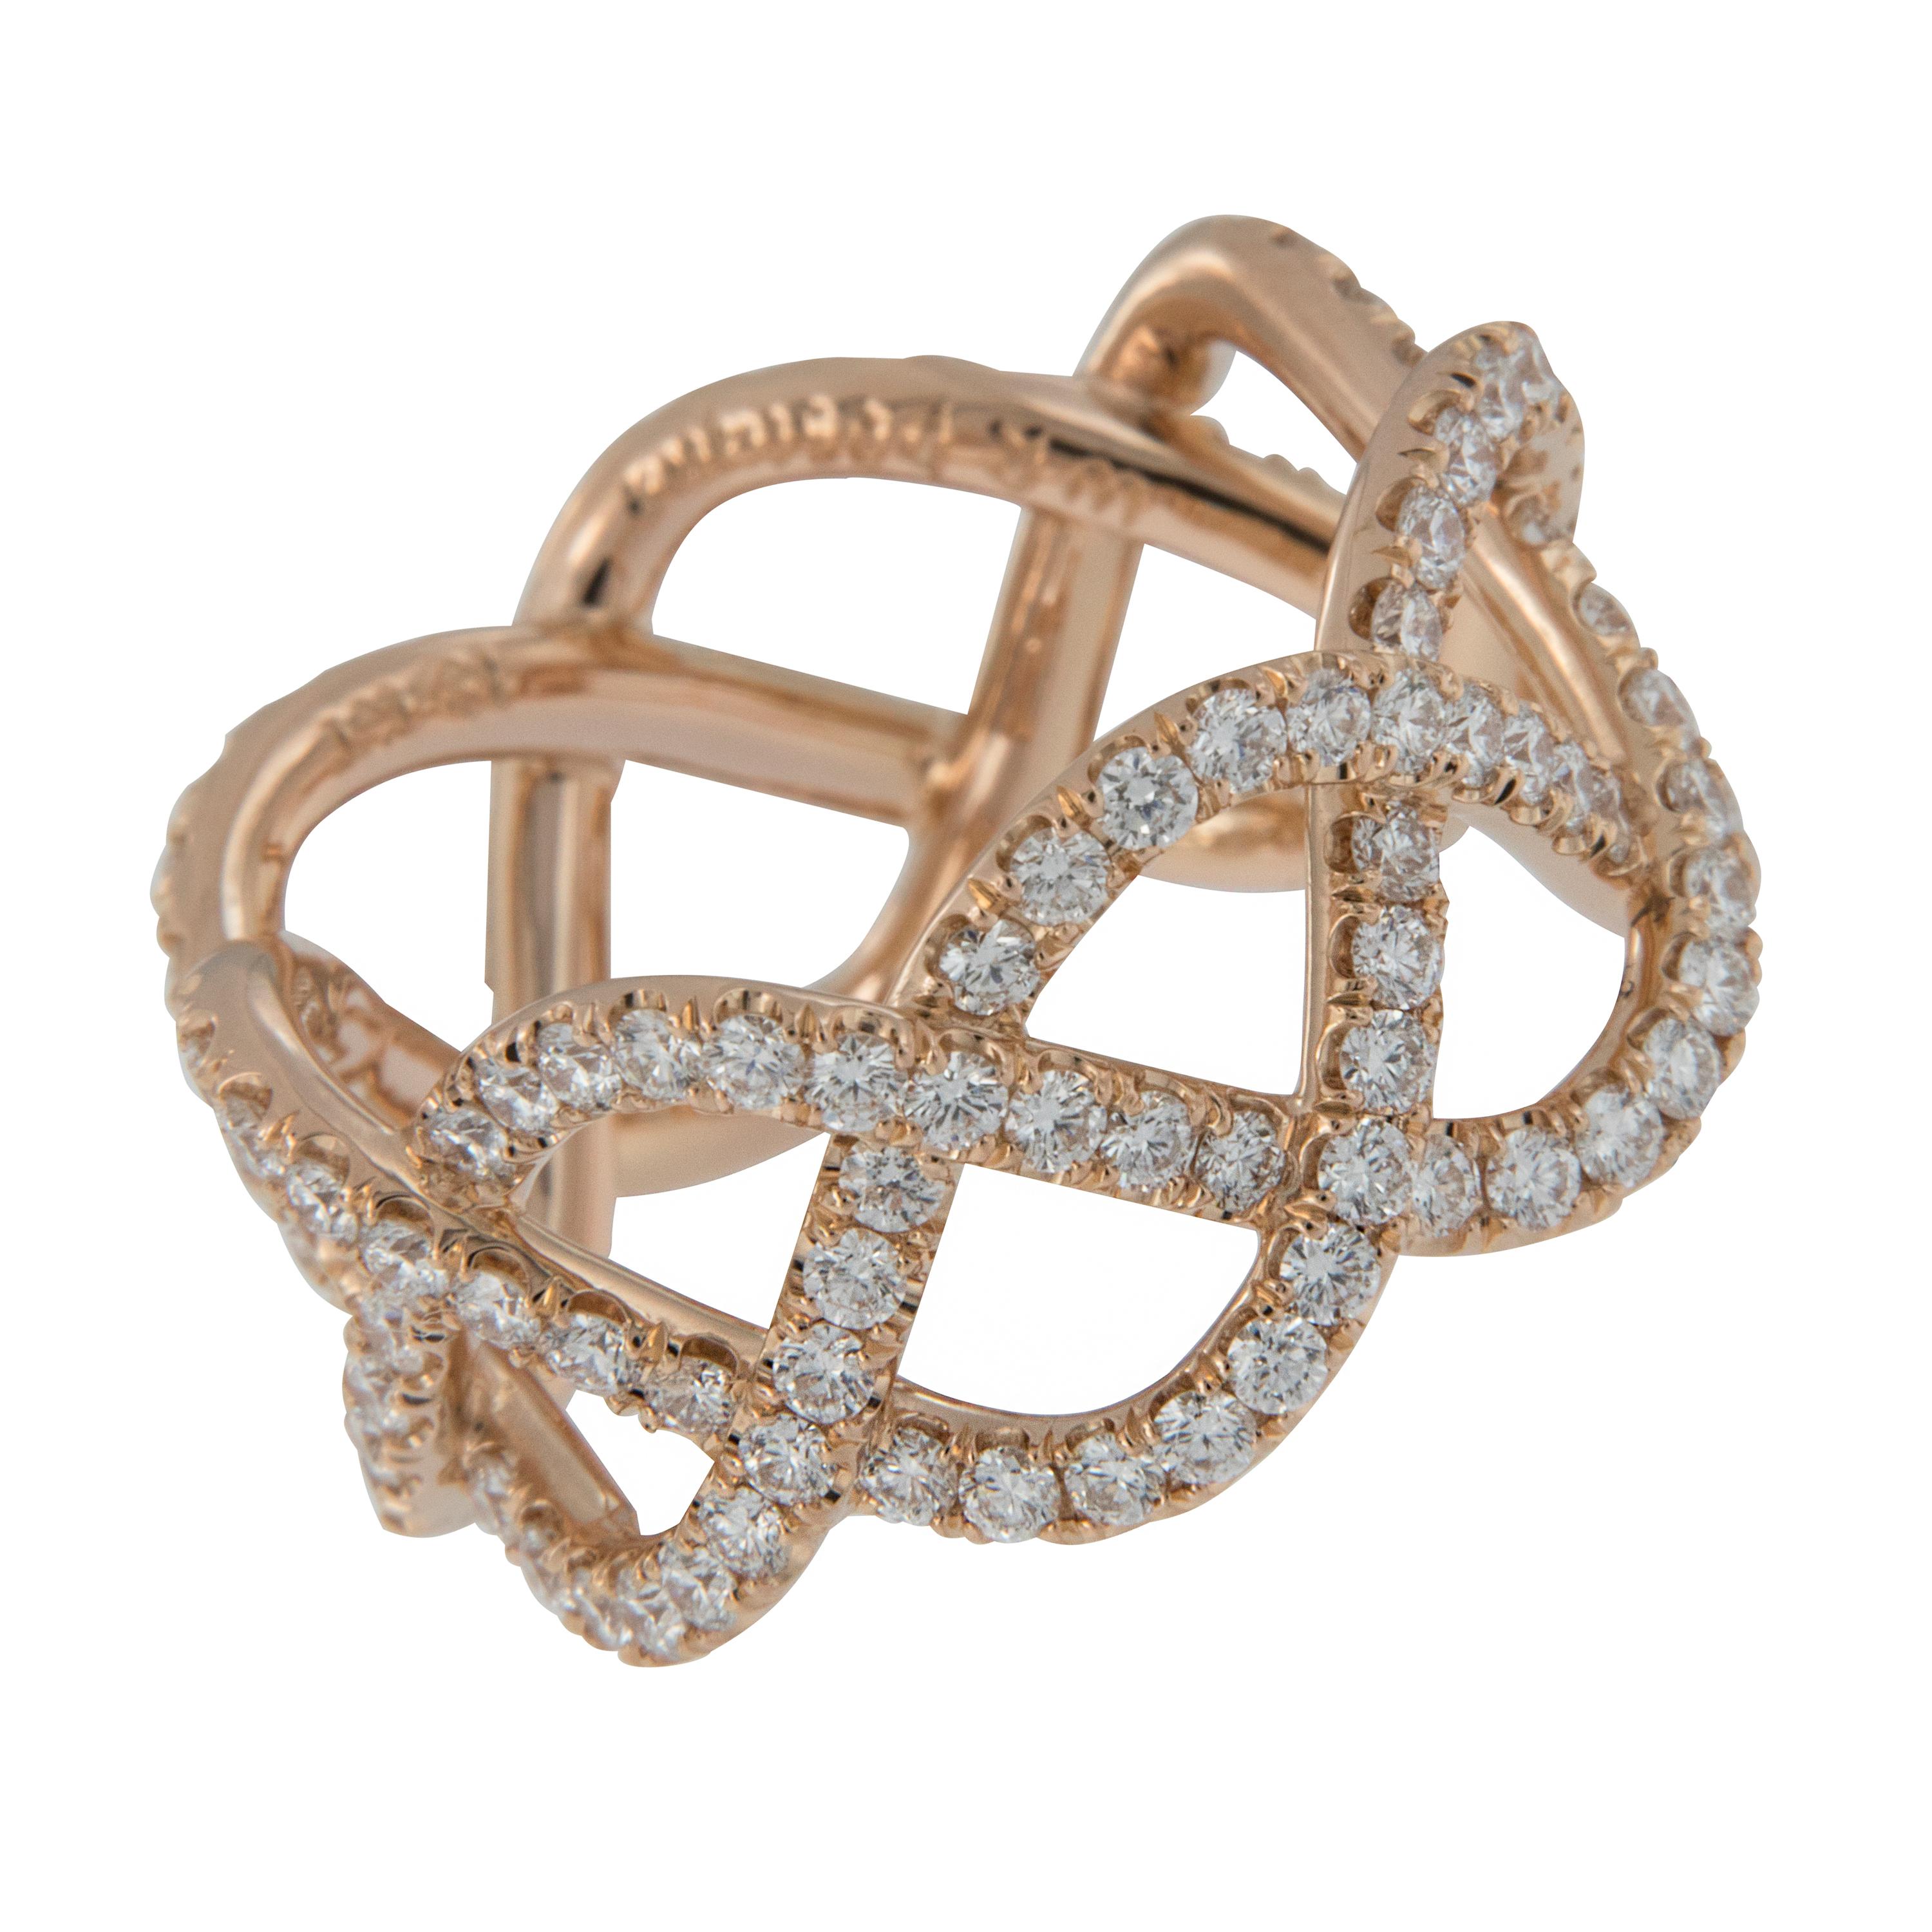 The rare soft color of this 20 karat rose gold diamond ring, hand made by William Rosenberg is breathtaking! The delicate open weave design is accented by 1.35 Cttw round brilliant cut diamonds of VVS clarity & E-F color to top off the